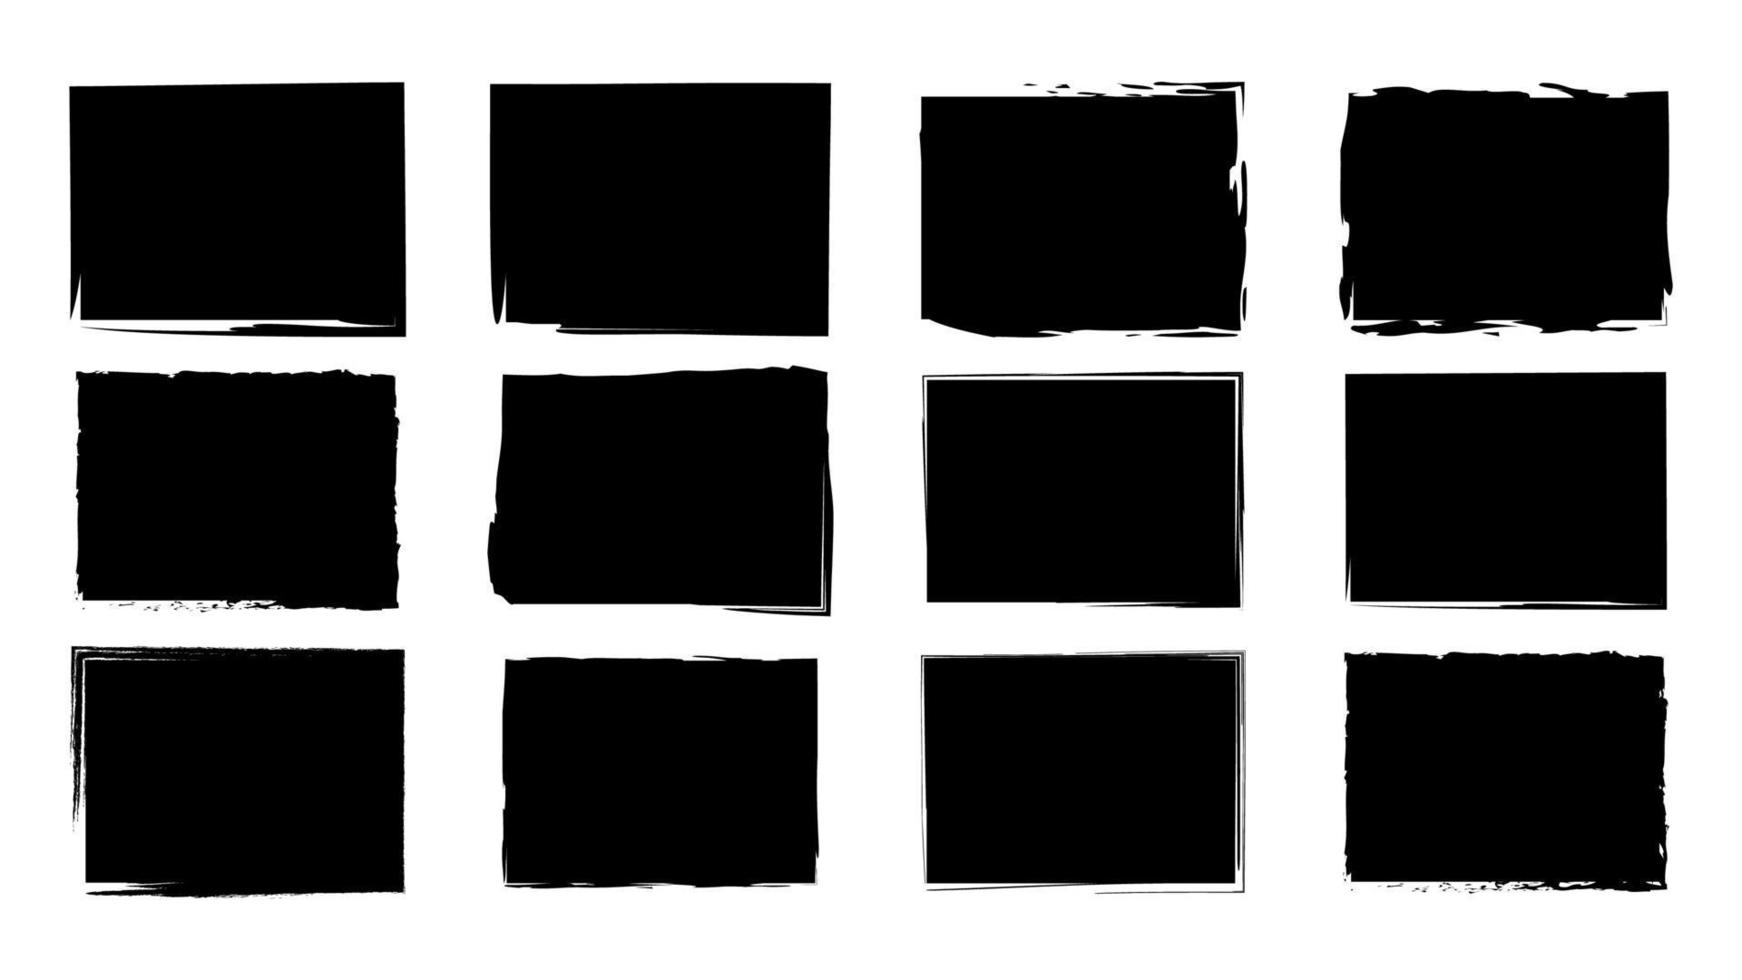 Dirty frames grunge. Ink brush strokes. distress textures of a square vector